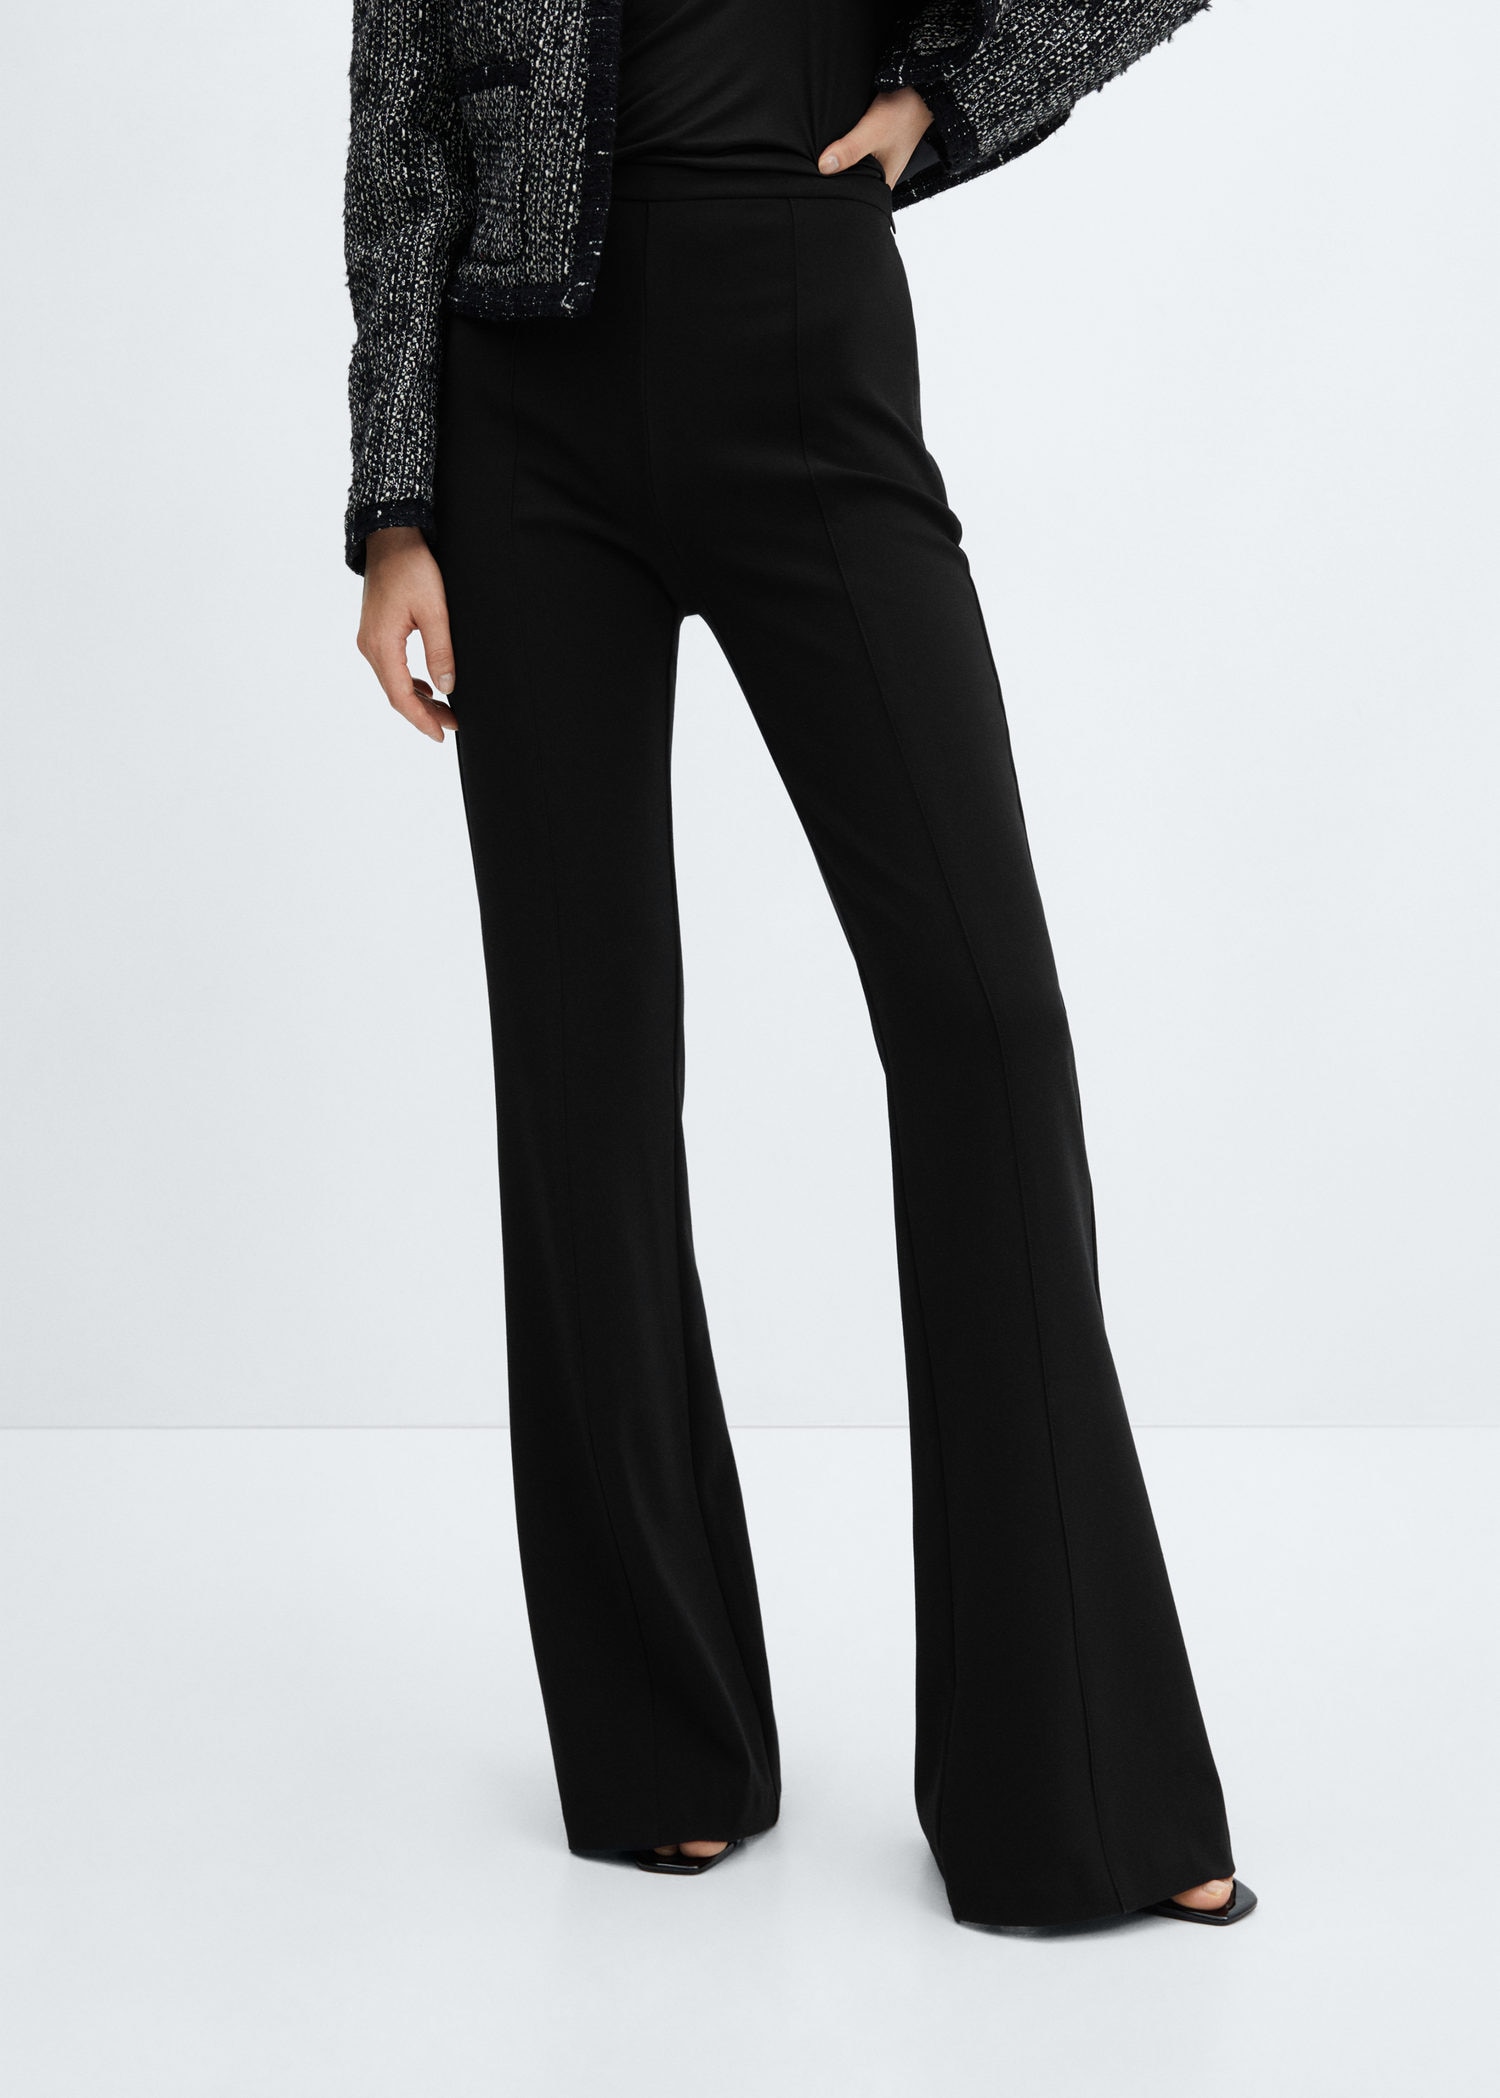 Plus Size Matte Leather High Waist Stretch Pants With Hem Side Zip And  Bodycon Pencil For Women 7XL Slacks And Plus Size Leather Trousers From  Jiaoshuizuo, $29.72 | DHgate.Com